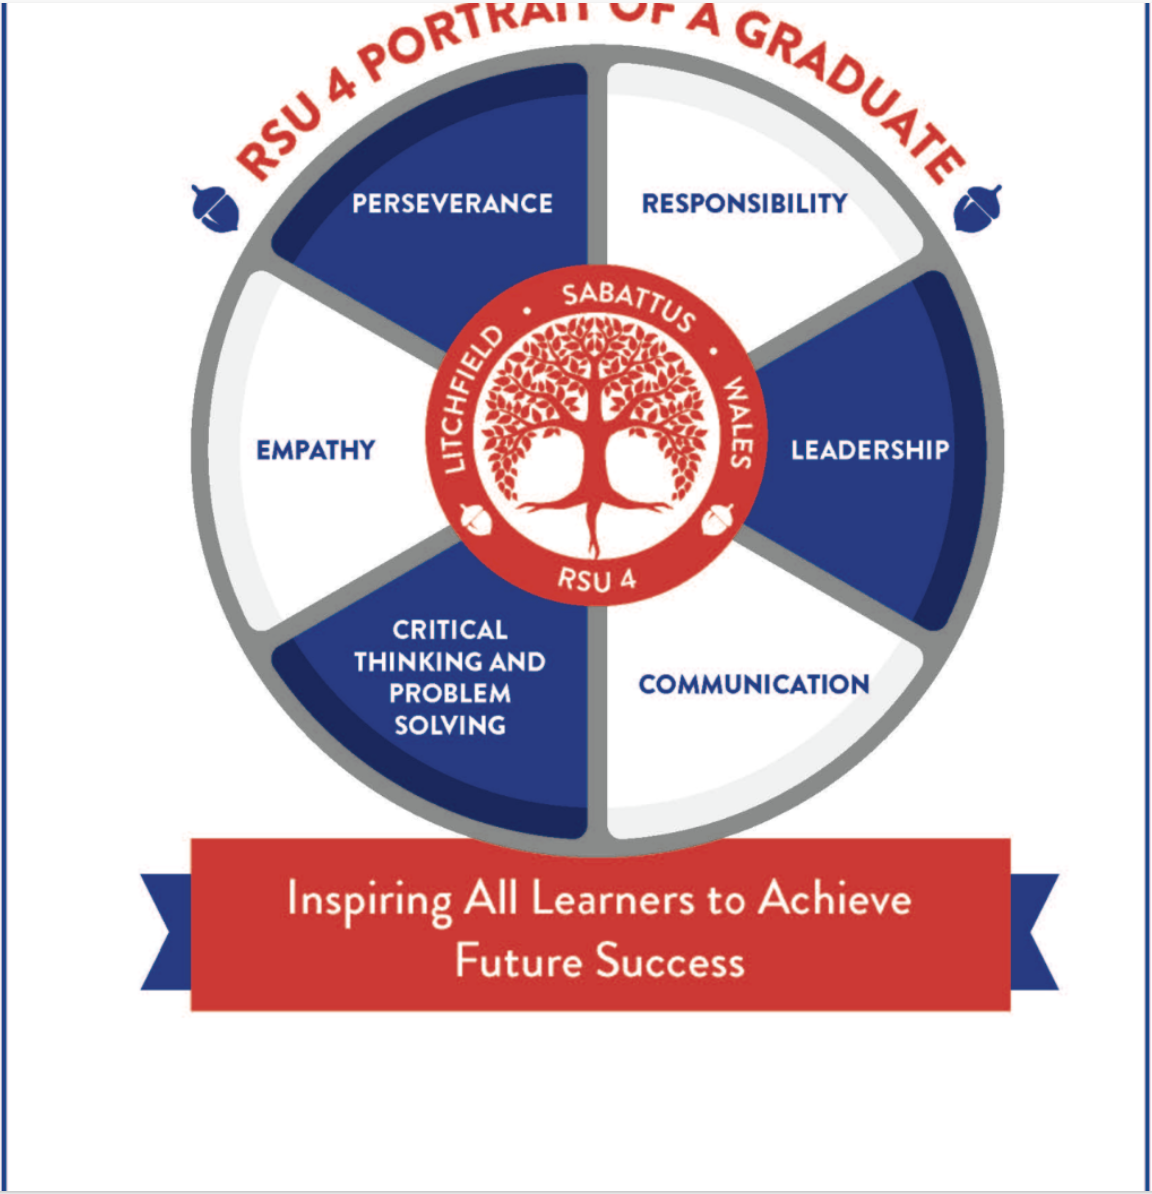 Inspiring all learners to achieve success